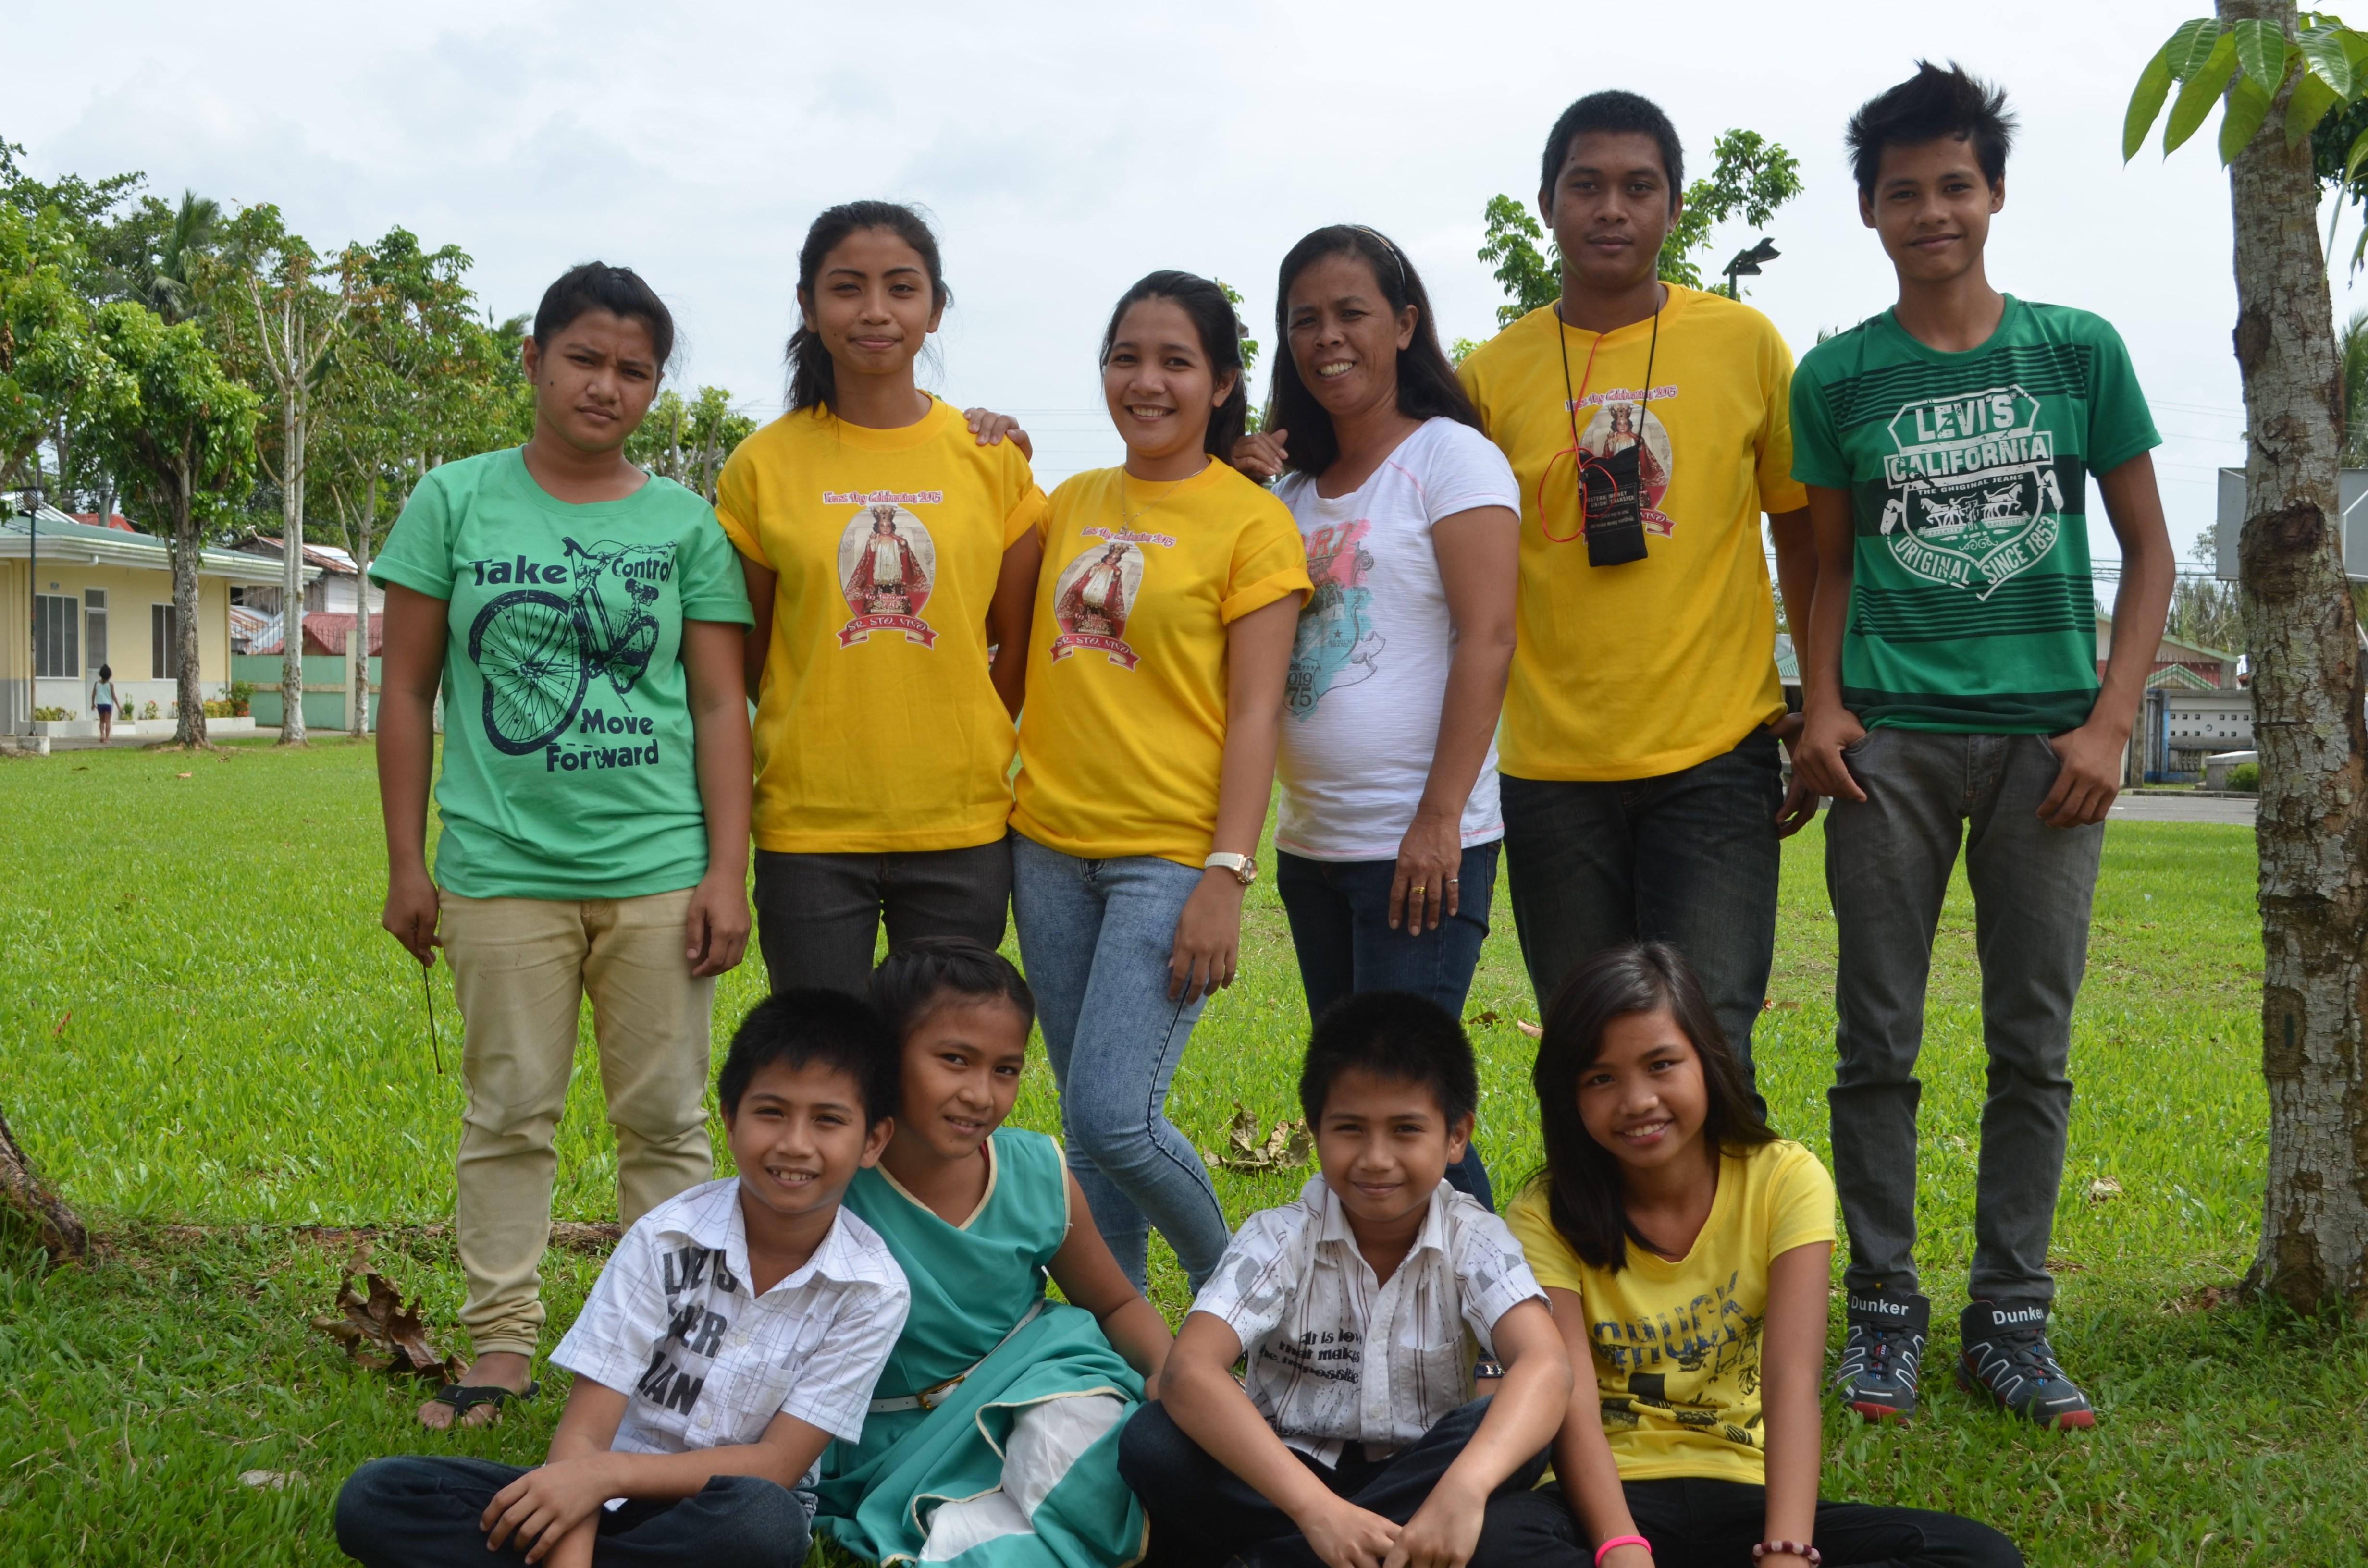 Asence, John Paul (backmost second from right) with his SOS family in Calbayog.